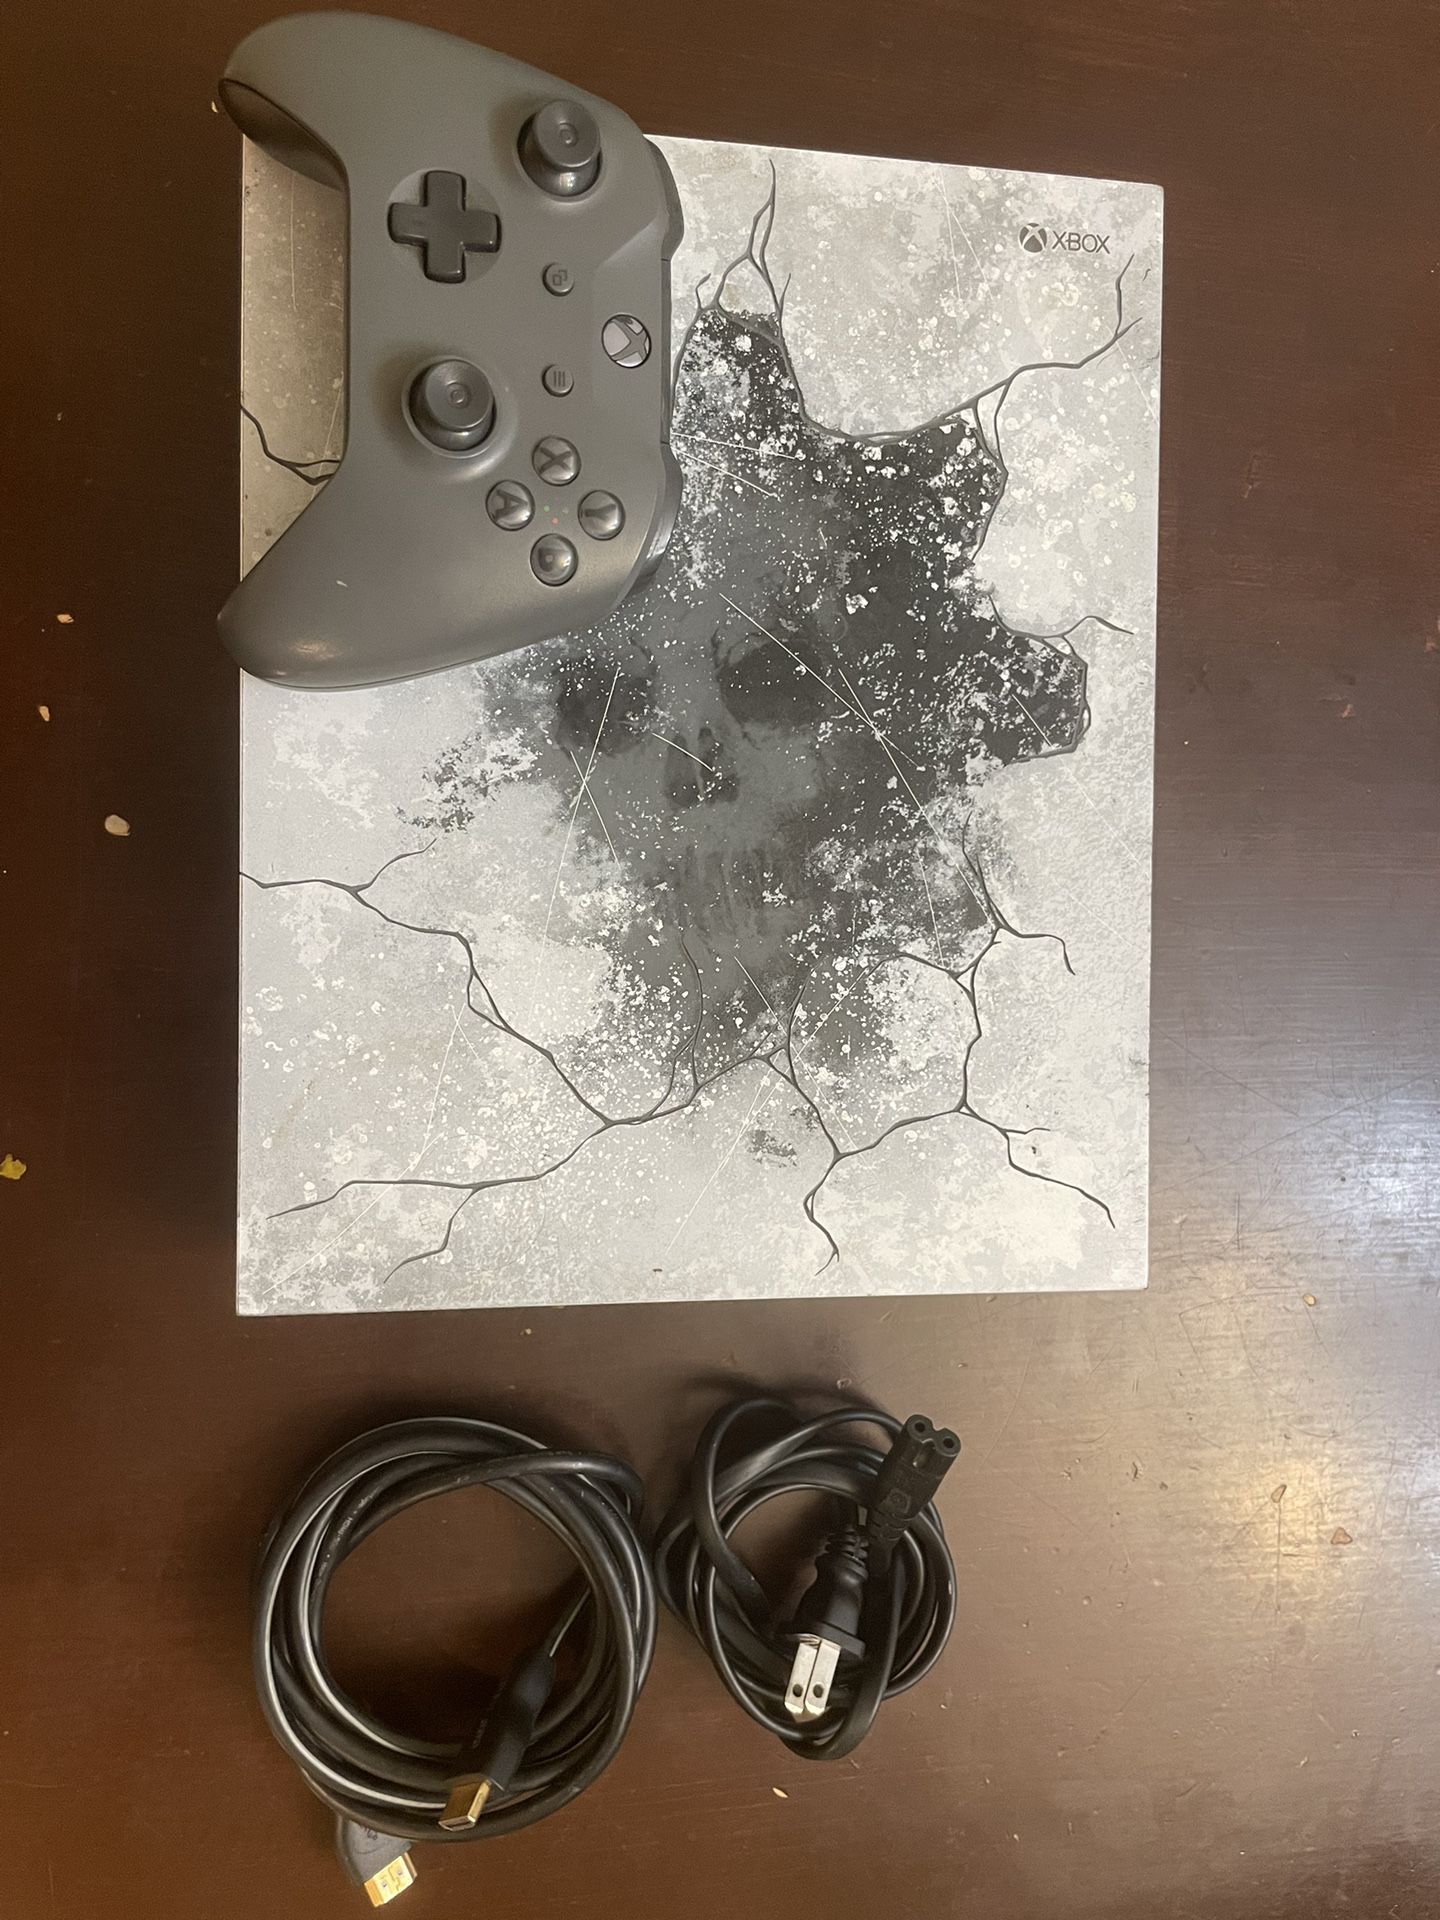 Xbox One X 1TB Gears 5 limited edition 